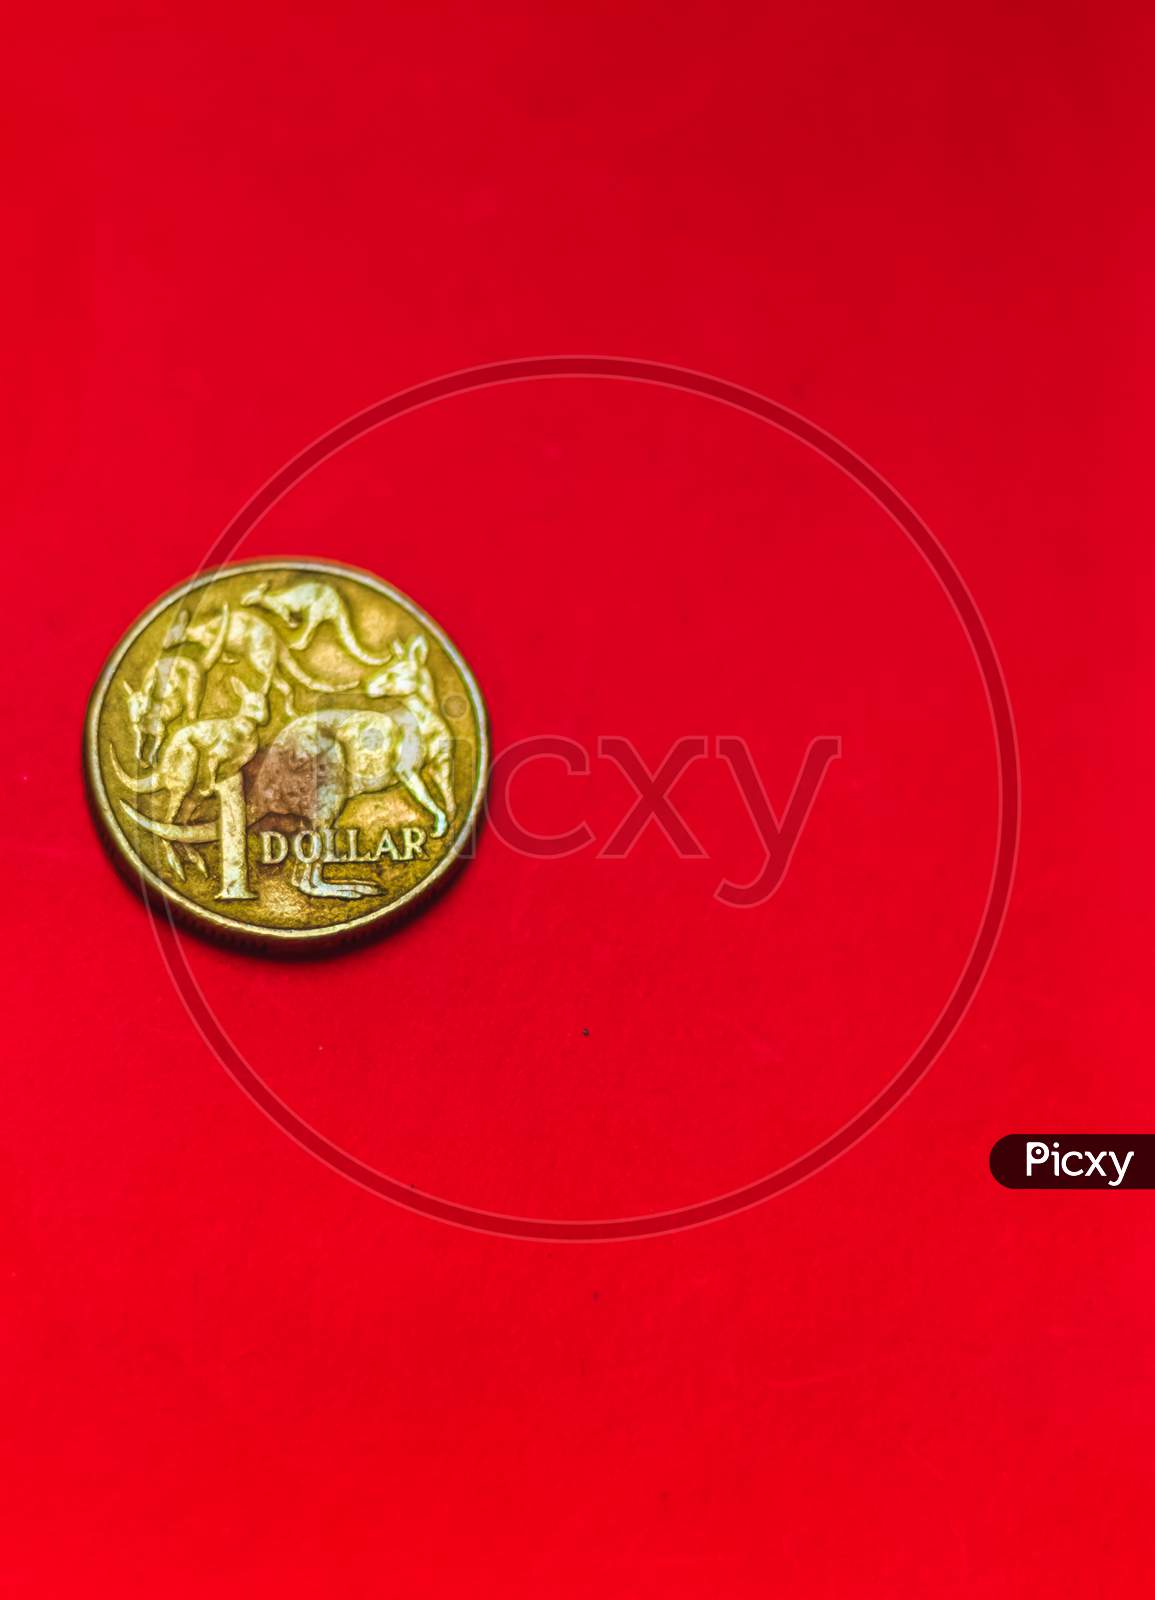 Australian Dollar Coin Front Isolated On Red Background With Soft Blurry And Space For Copy Text. One Dollar Coin 1995 Australian Currency. Old Coins Collections Worldwide.